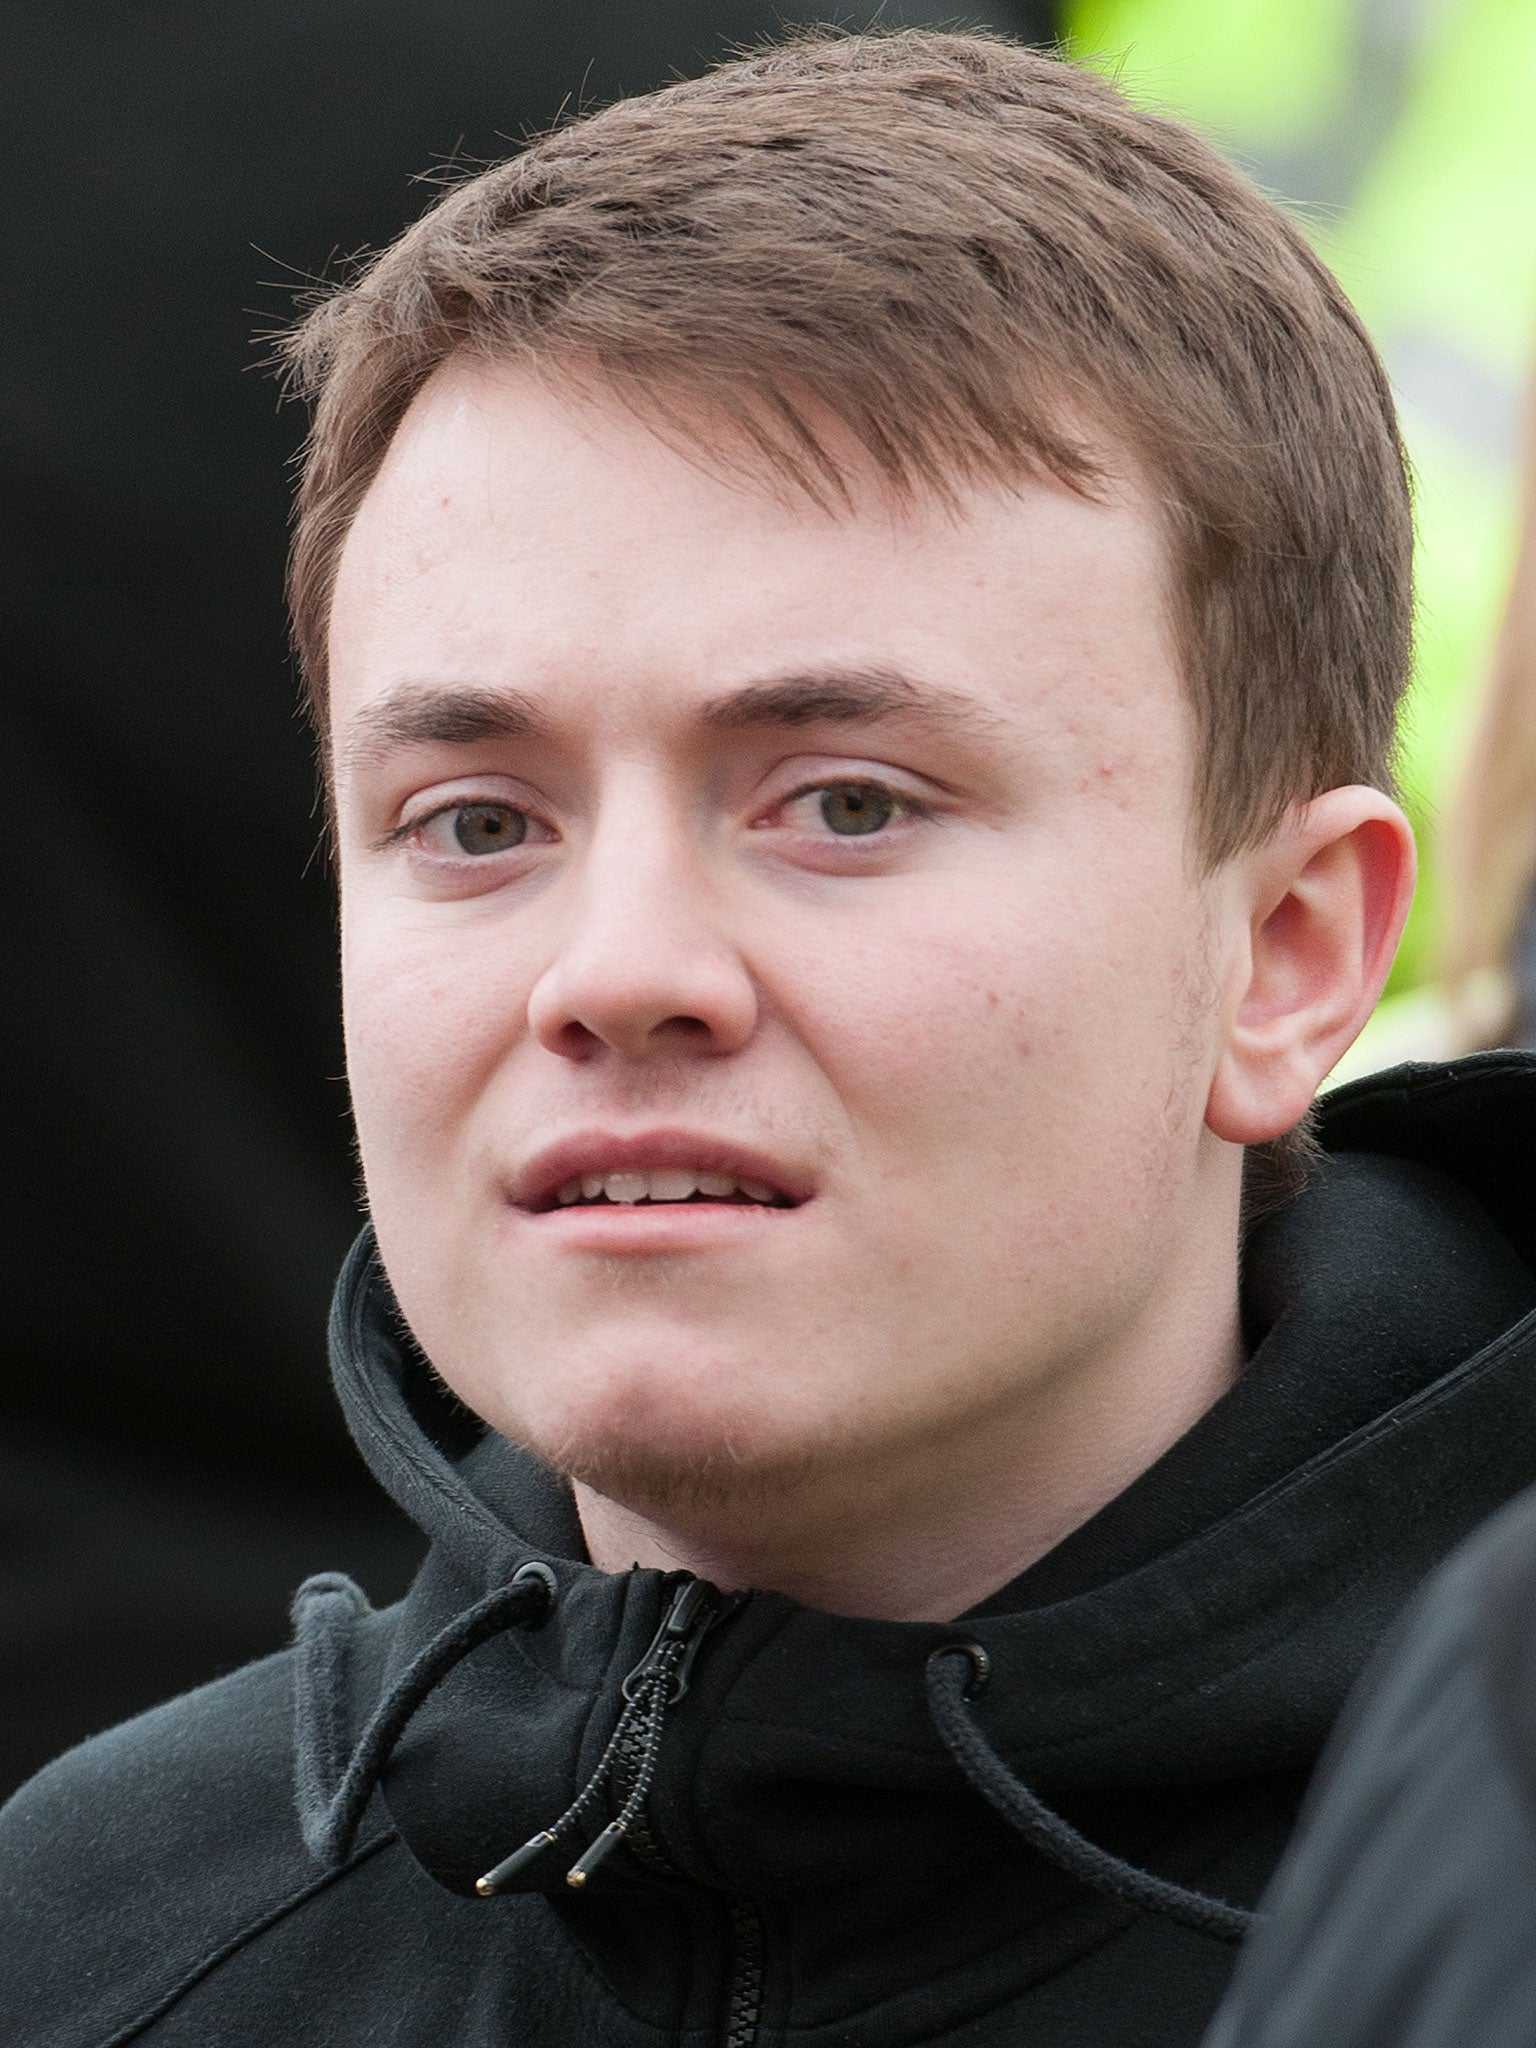 Jack Renshaw admitted plotting to kill his local Labour MP with a machete